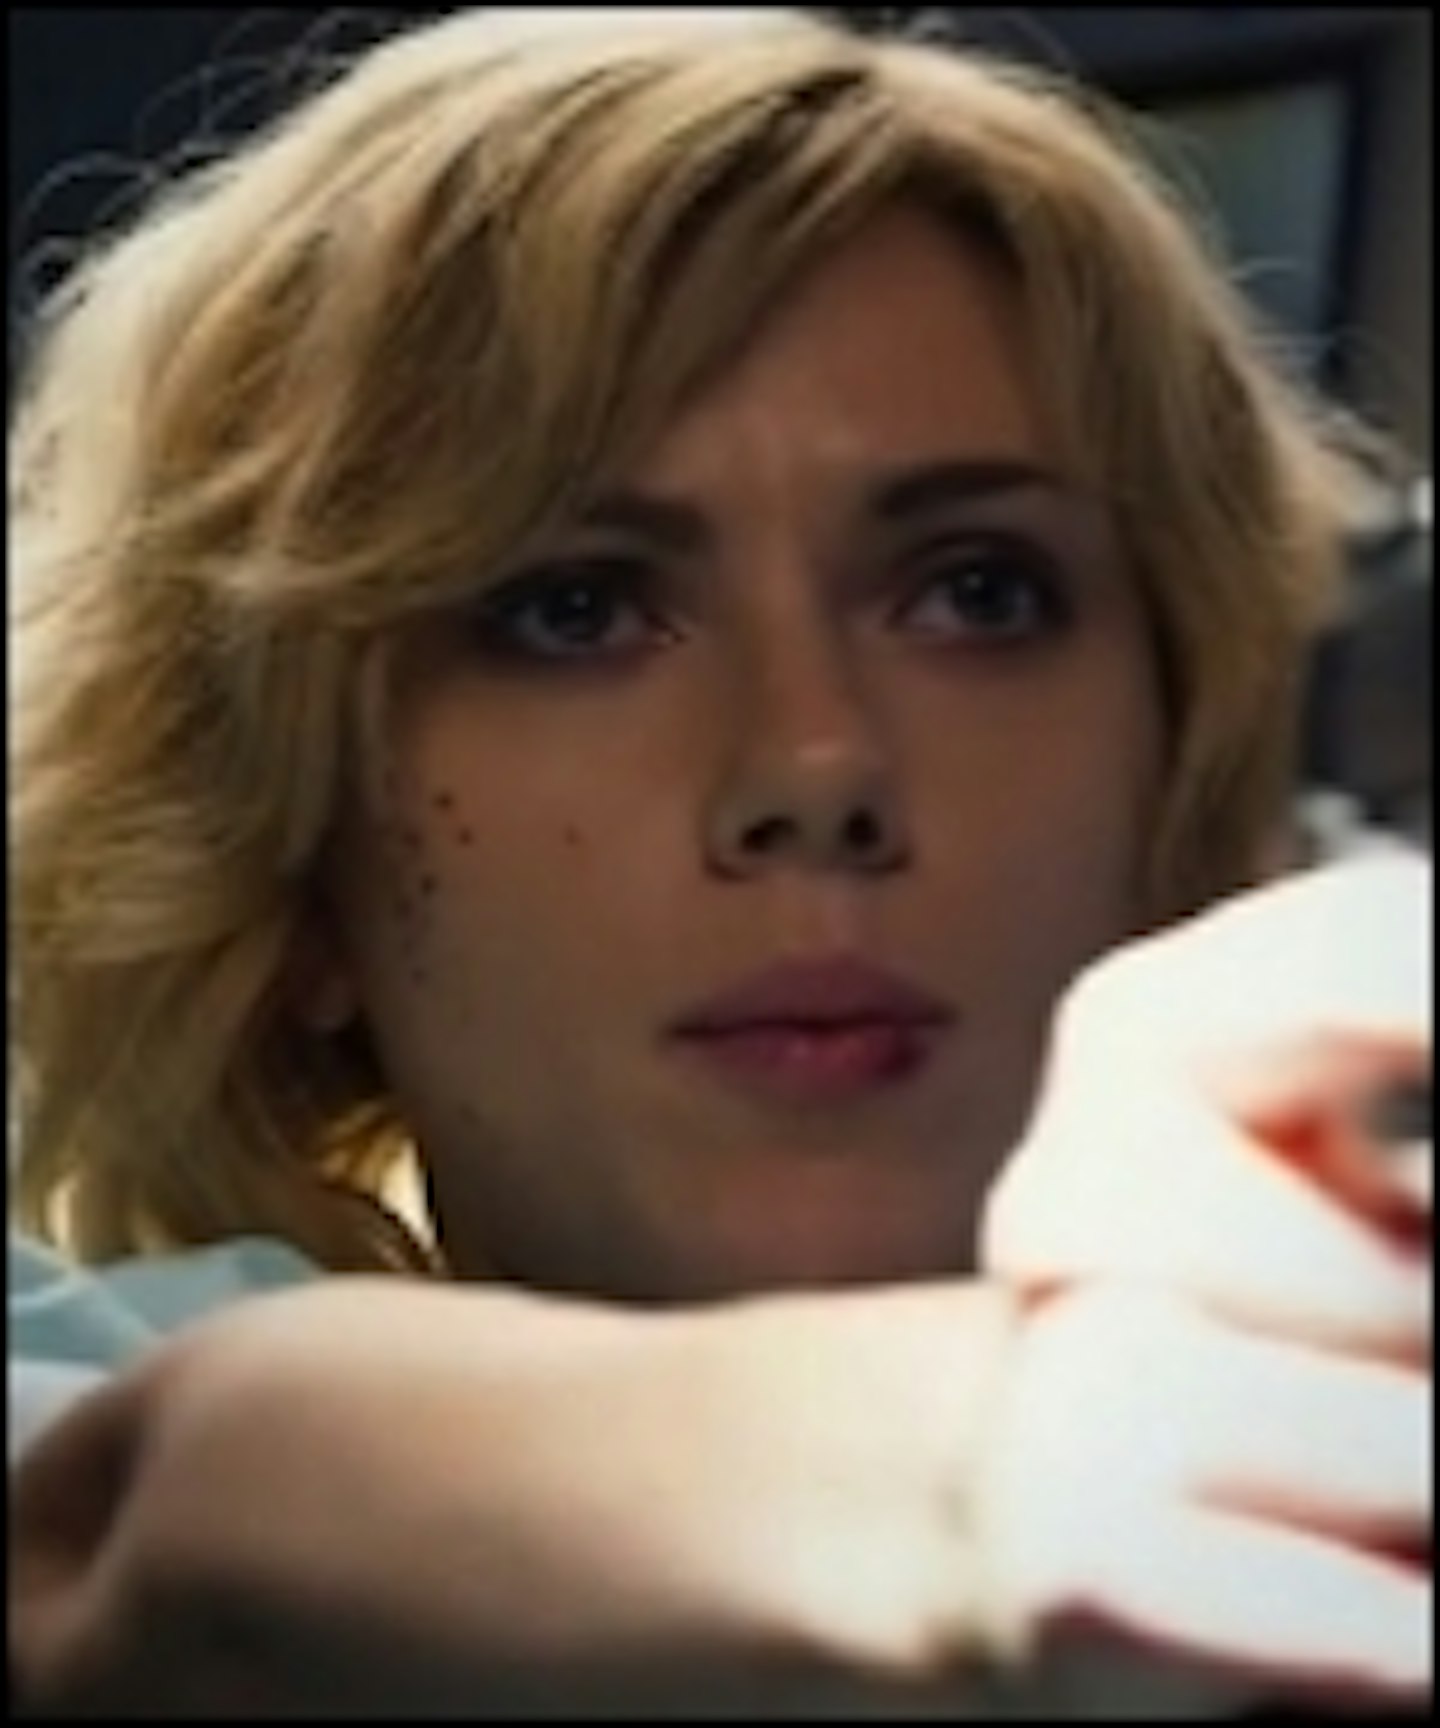 New International Lucy Trailer Leaps Online